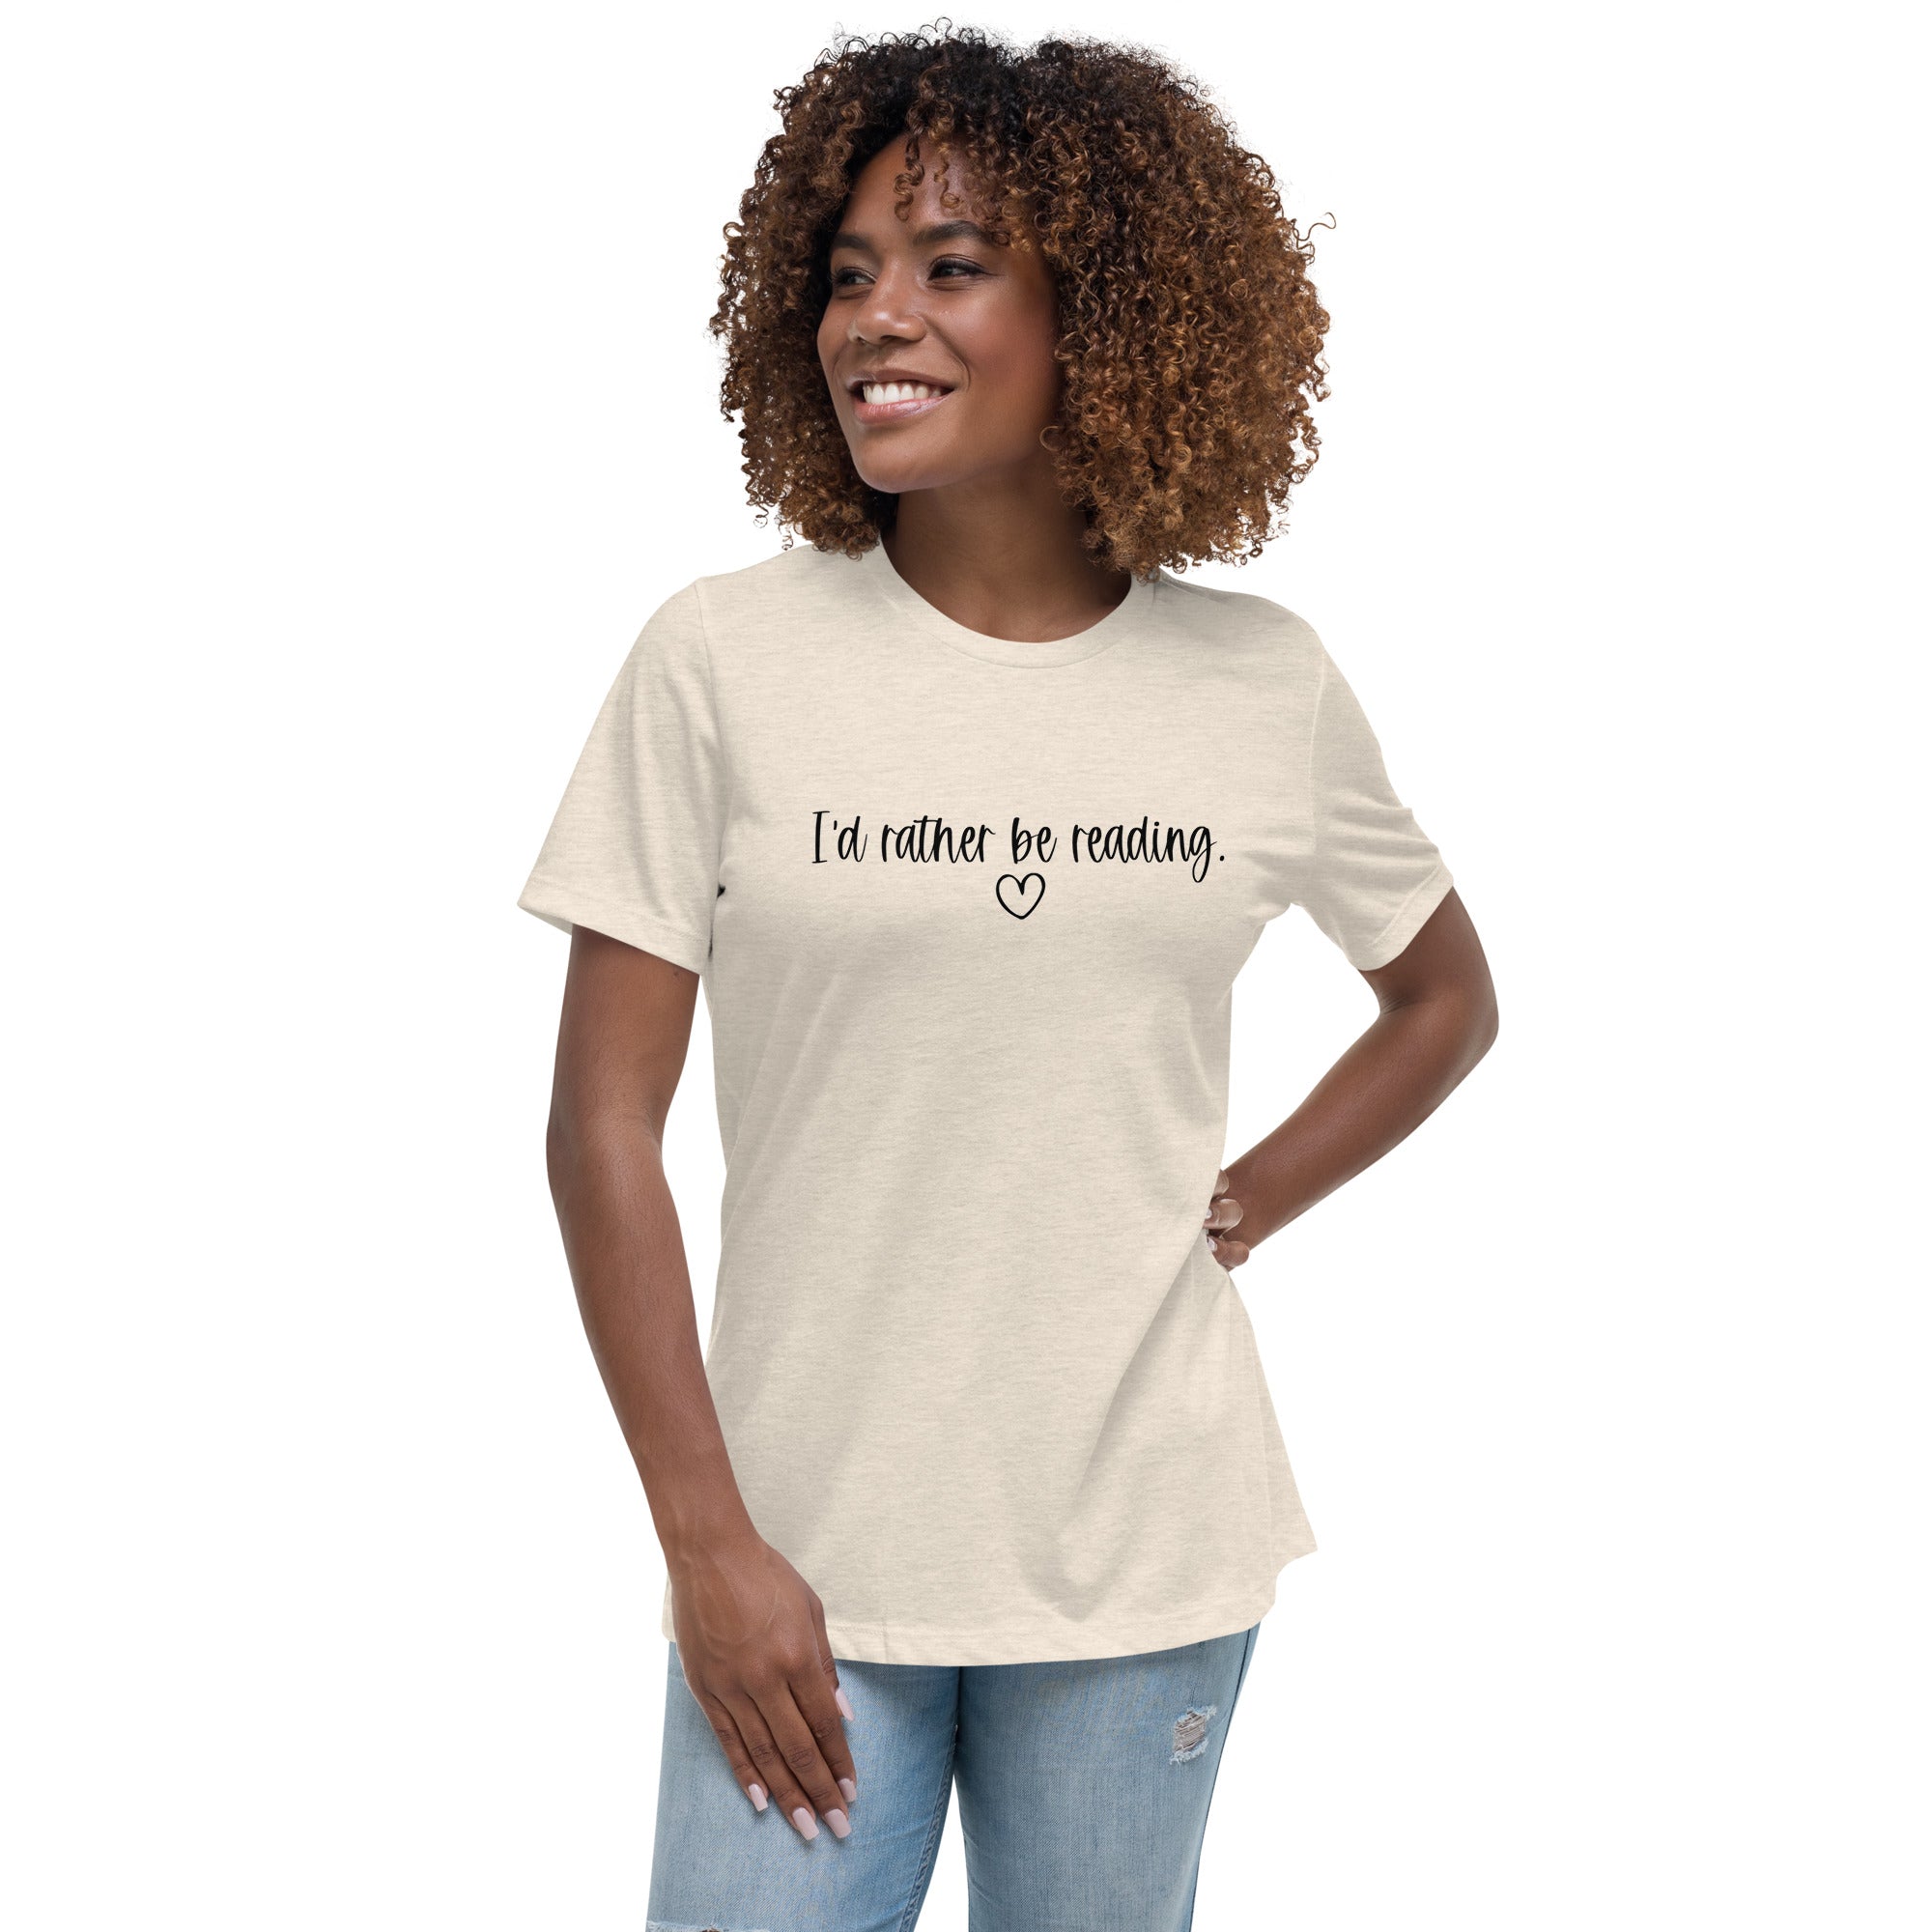 Rather Be Reading T-Shirt